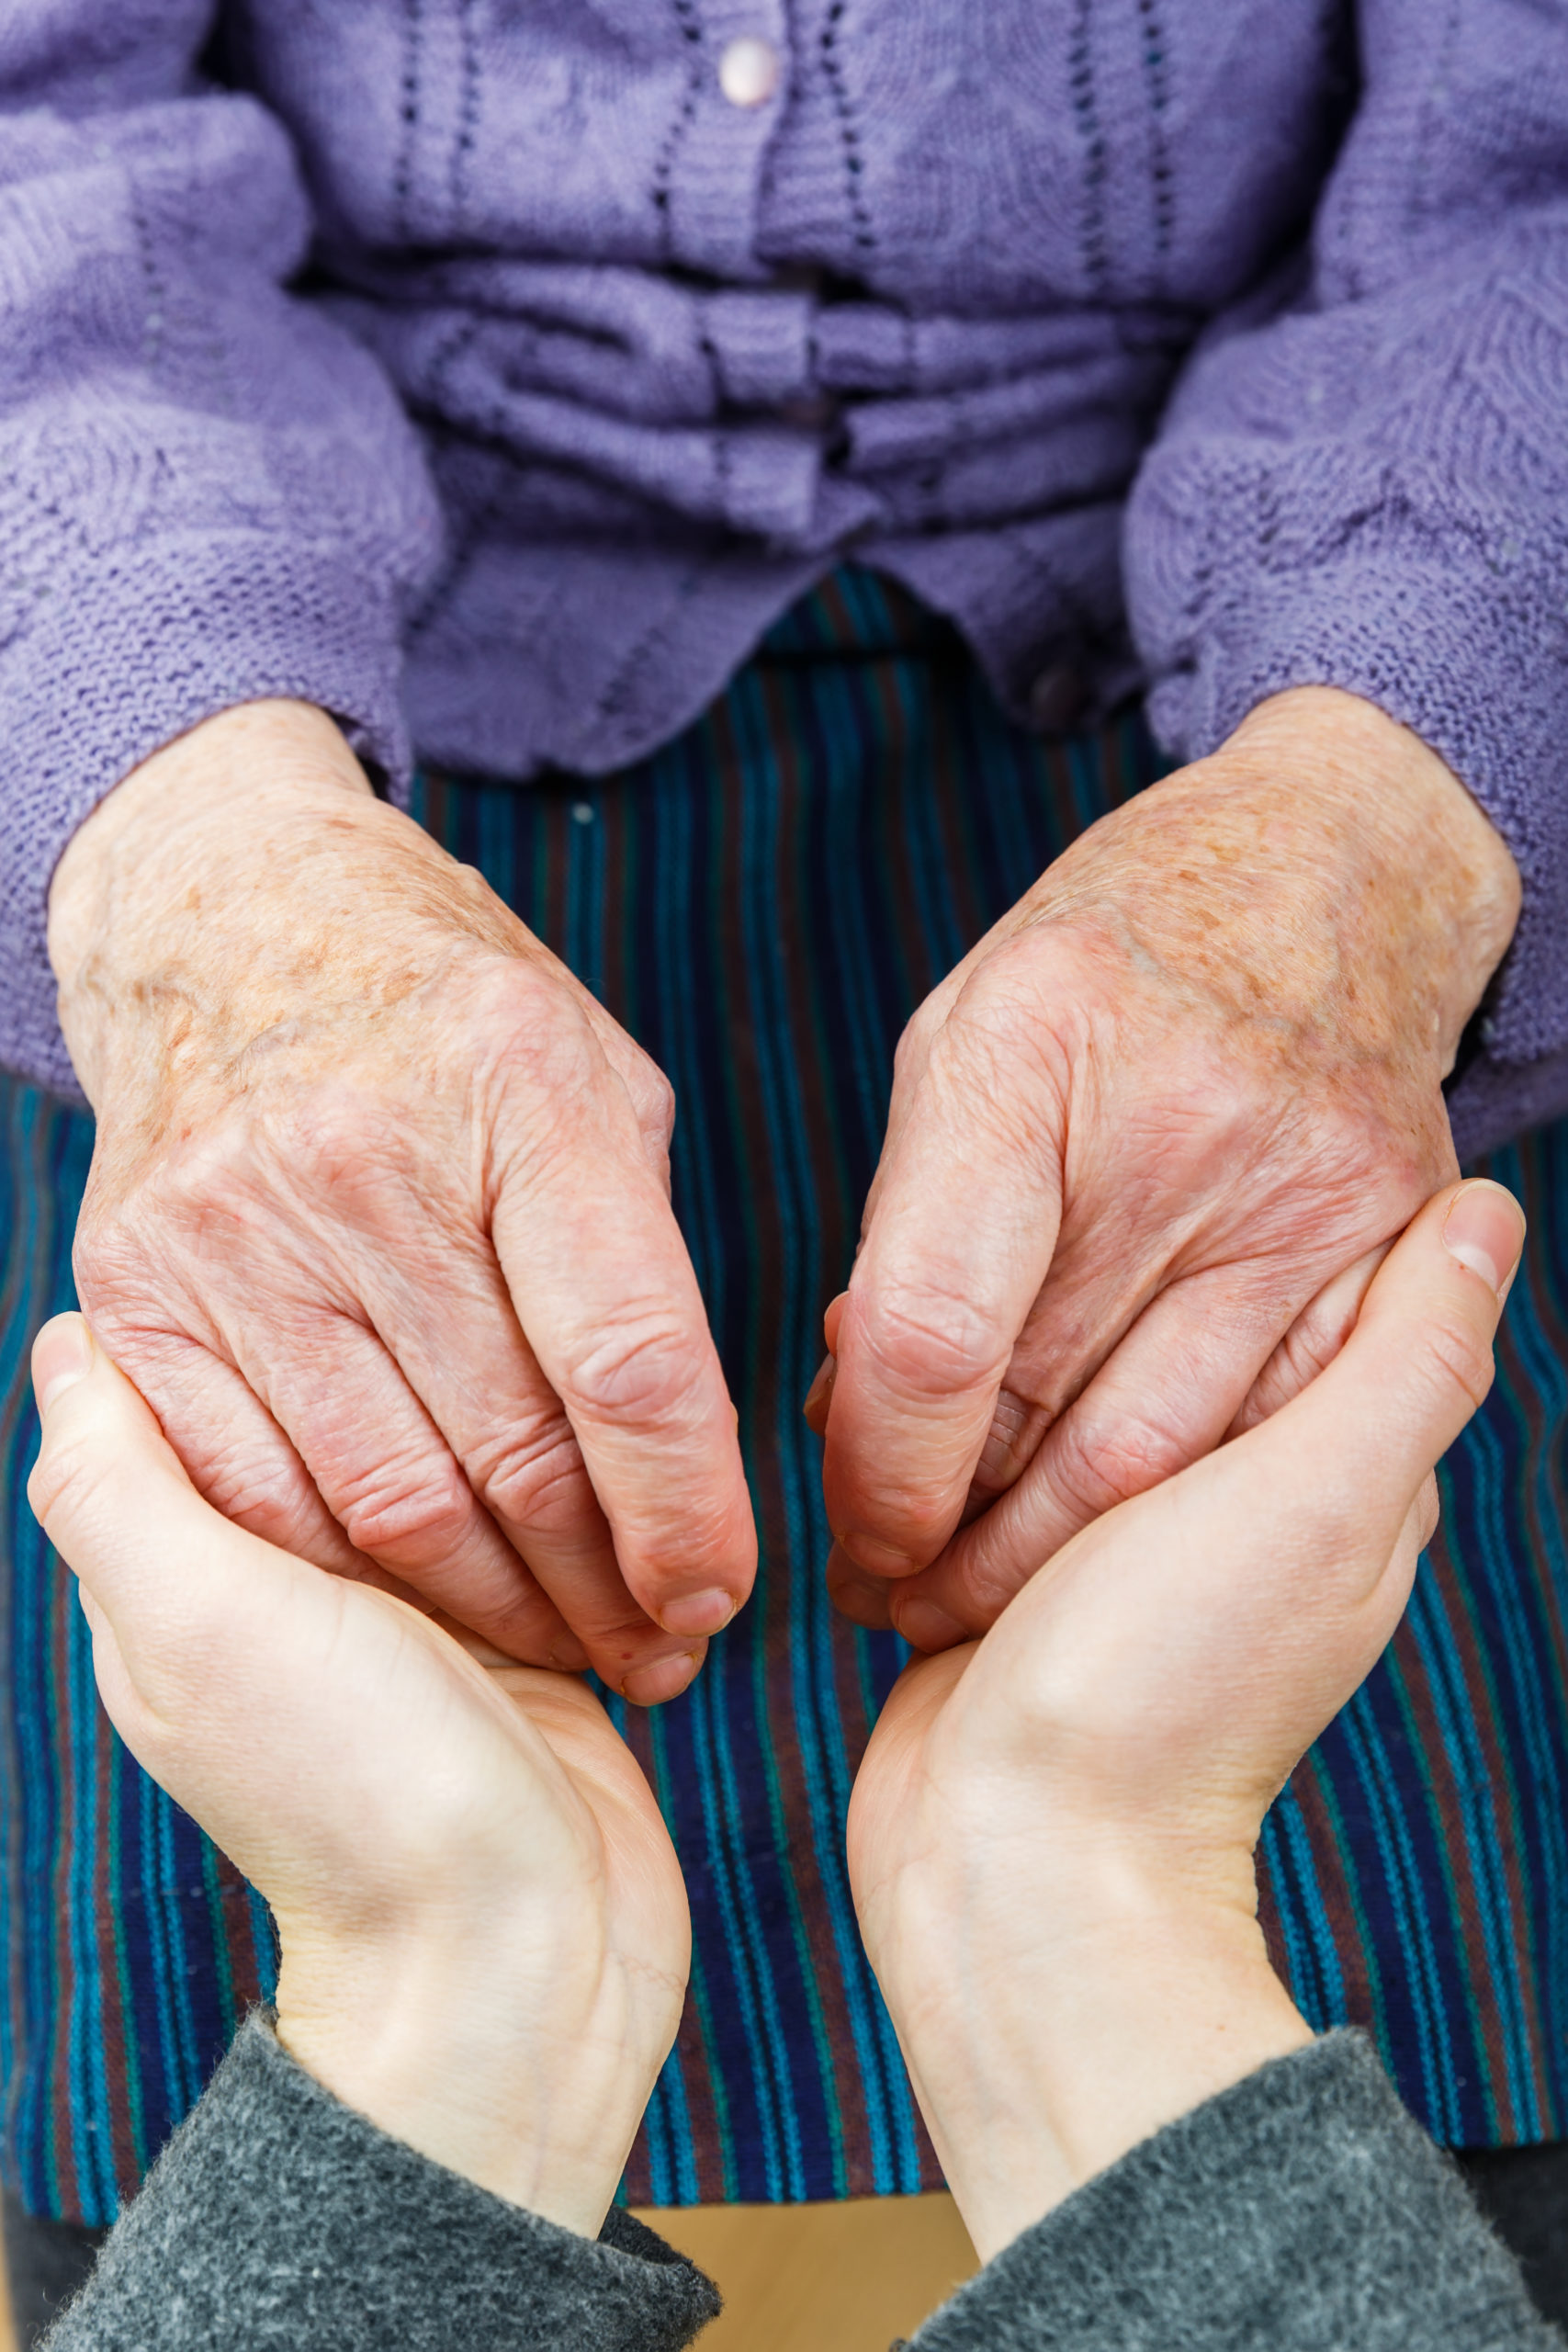 Papa Pal offering helping hands to senior companion